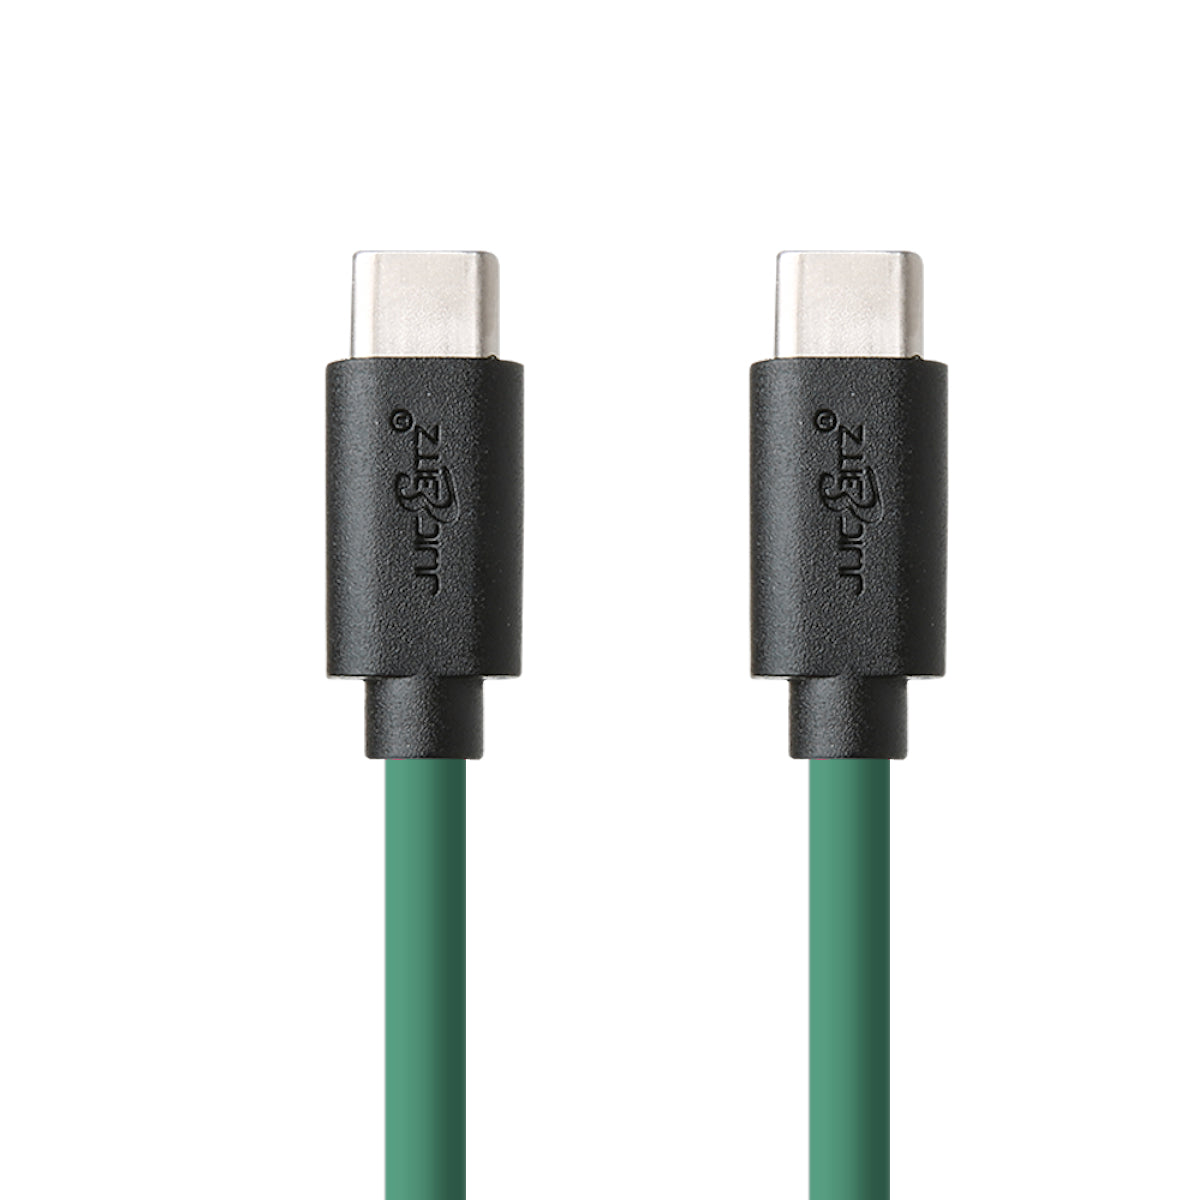 USB-C to USB-C 3A Charger Cable USB 2.0 Data Transfer Lead - Green